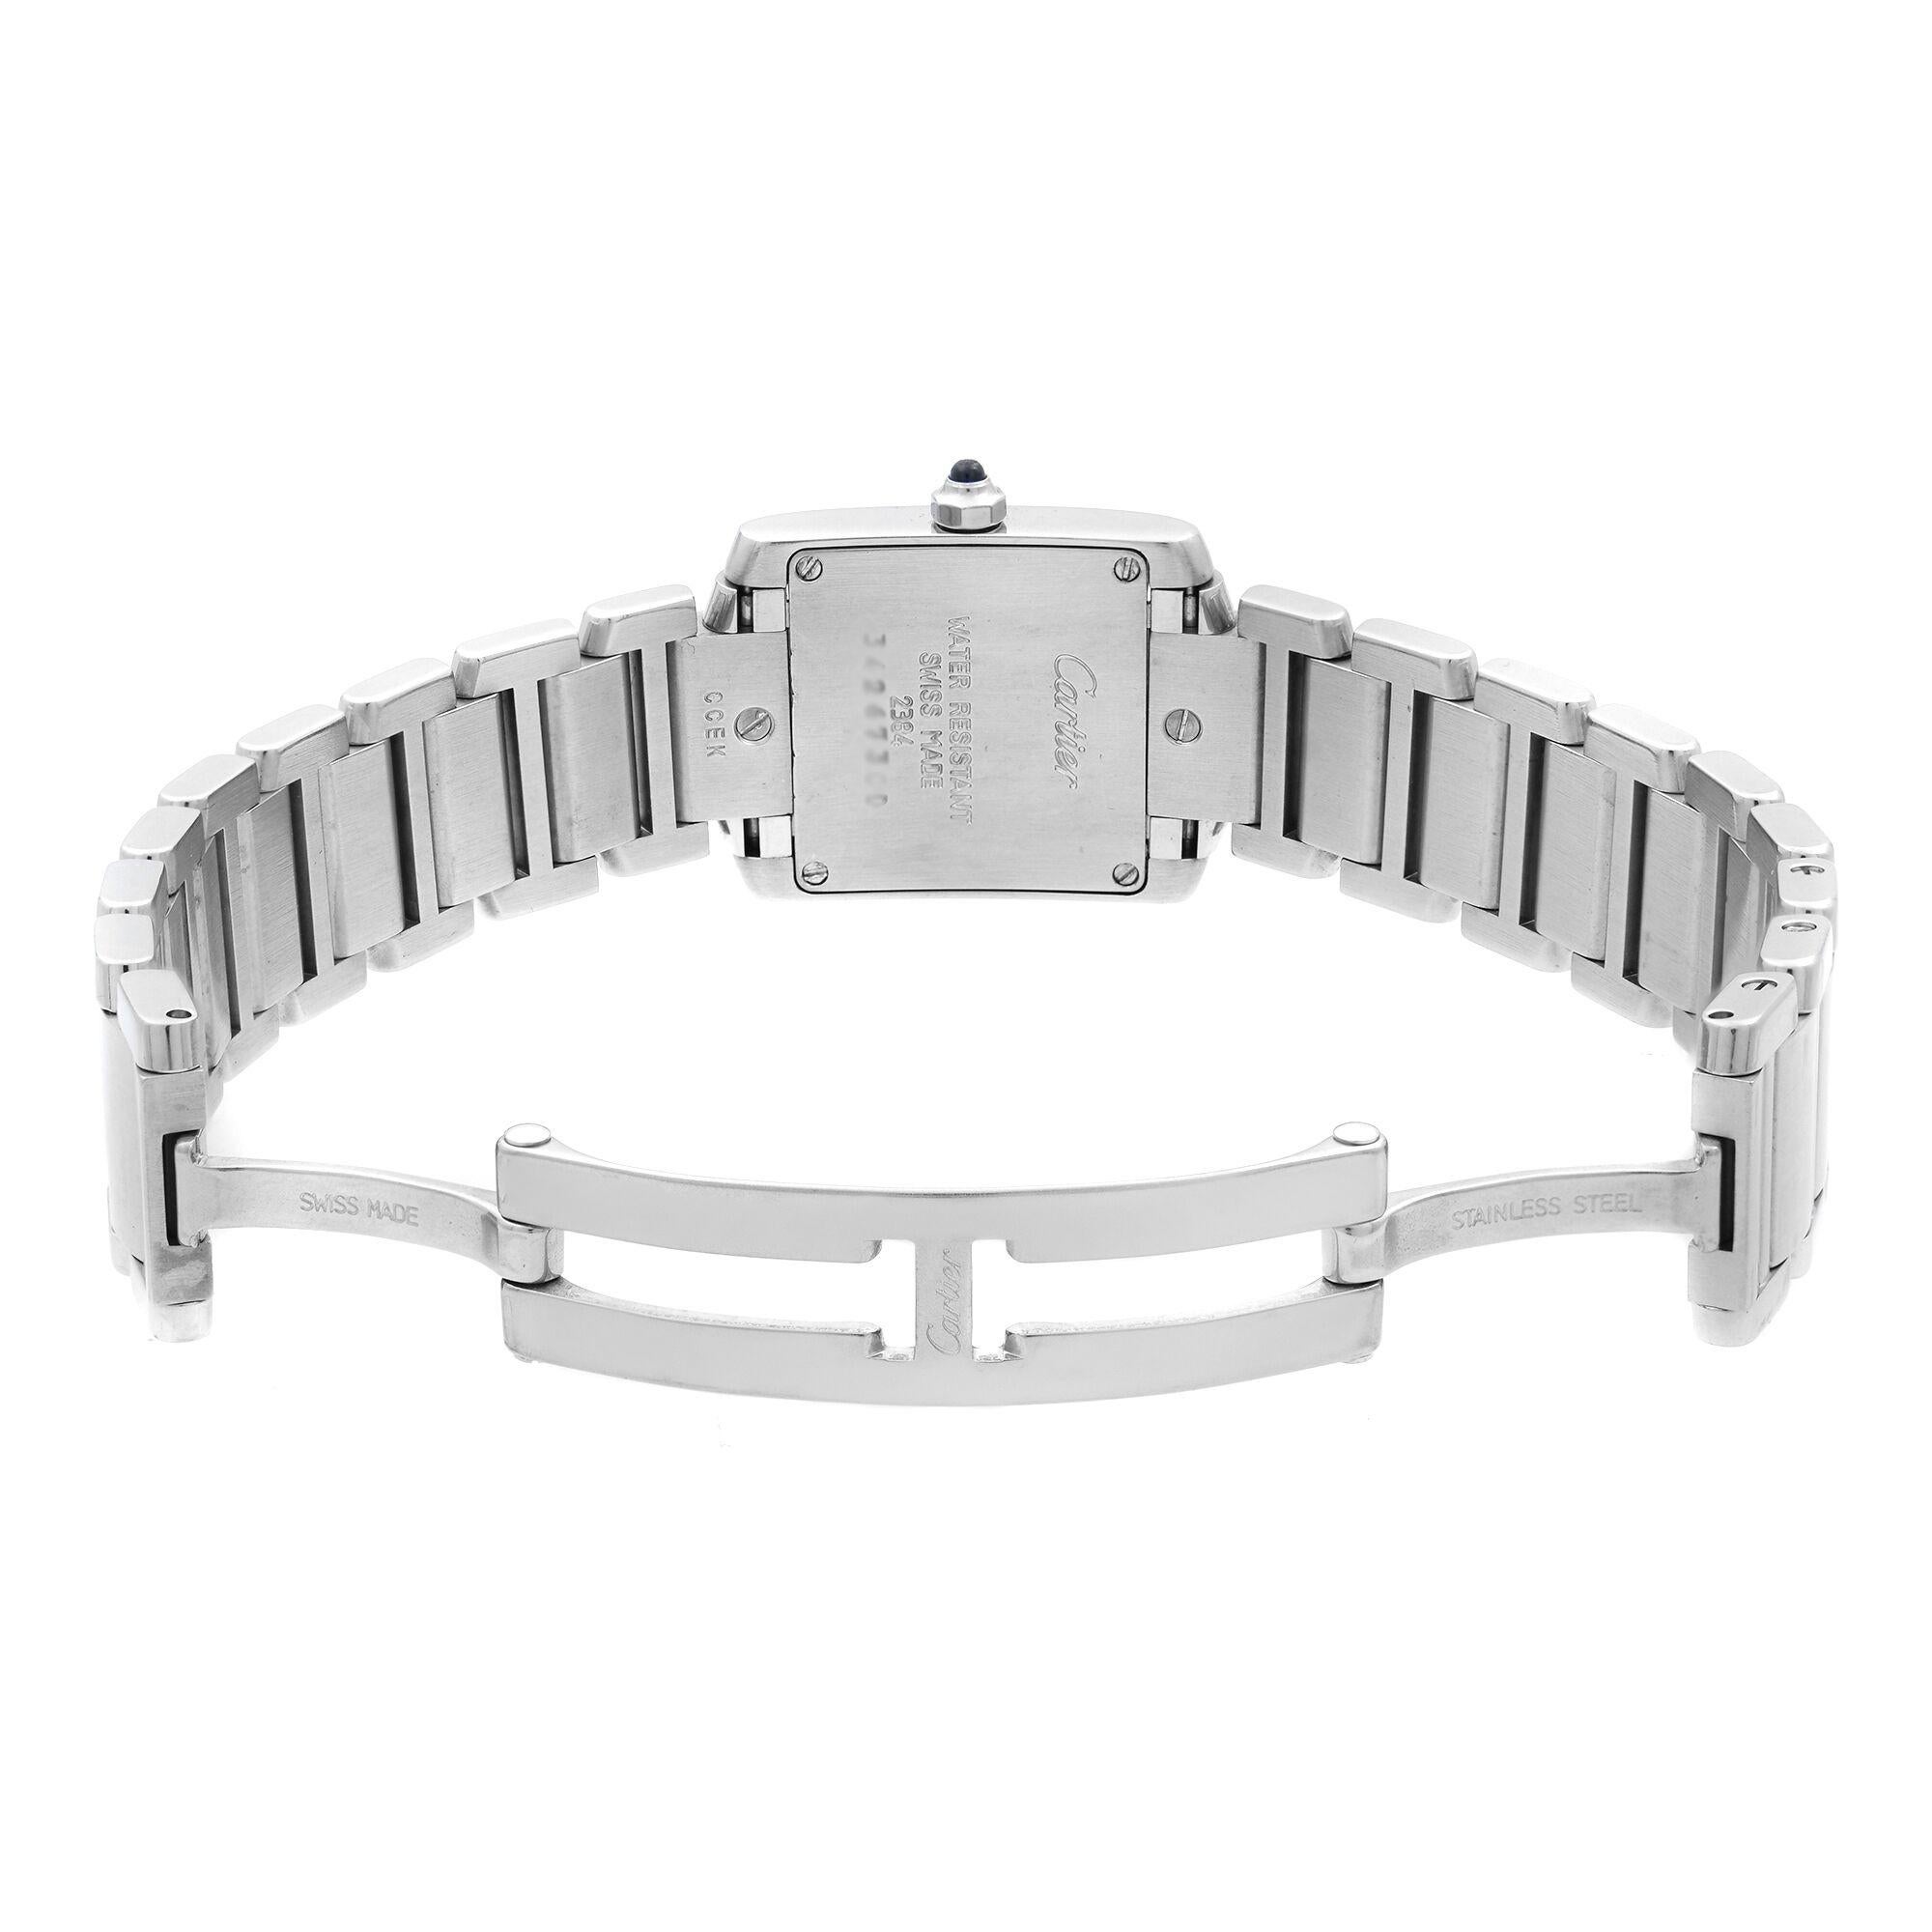 Cartier Tank Francaise Stainless Steel White Roman Dial Ladies Watch W51008Q3 2